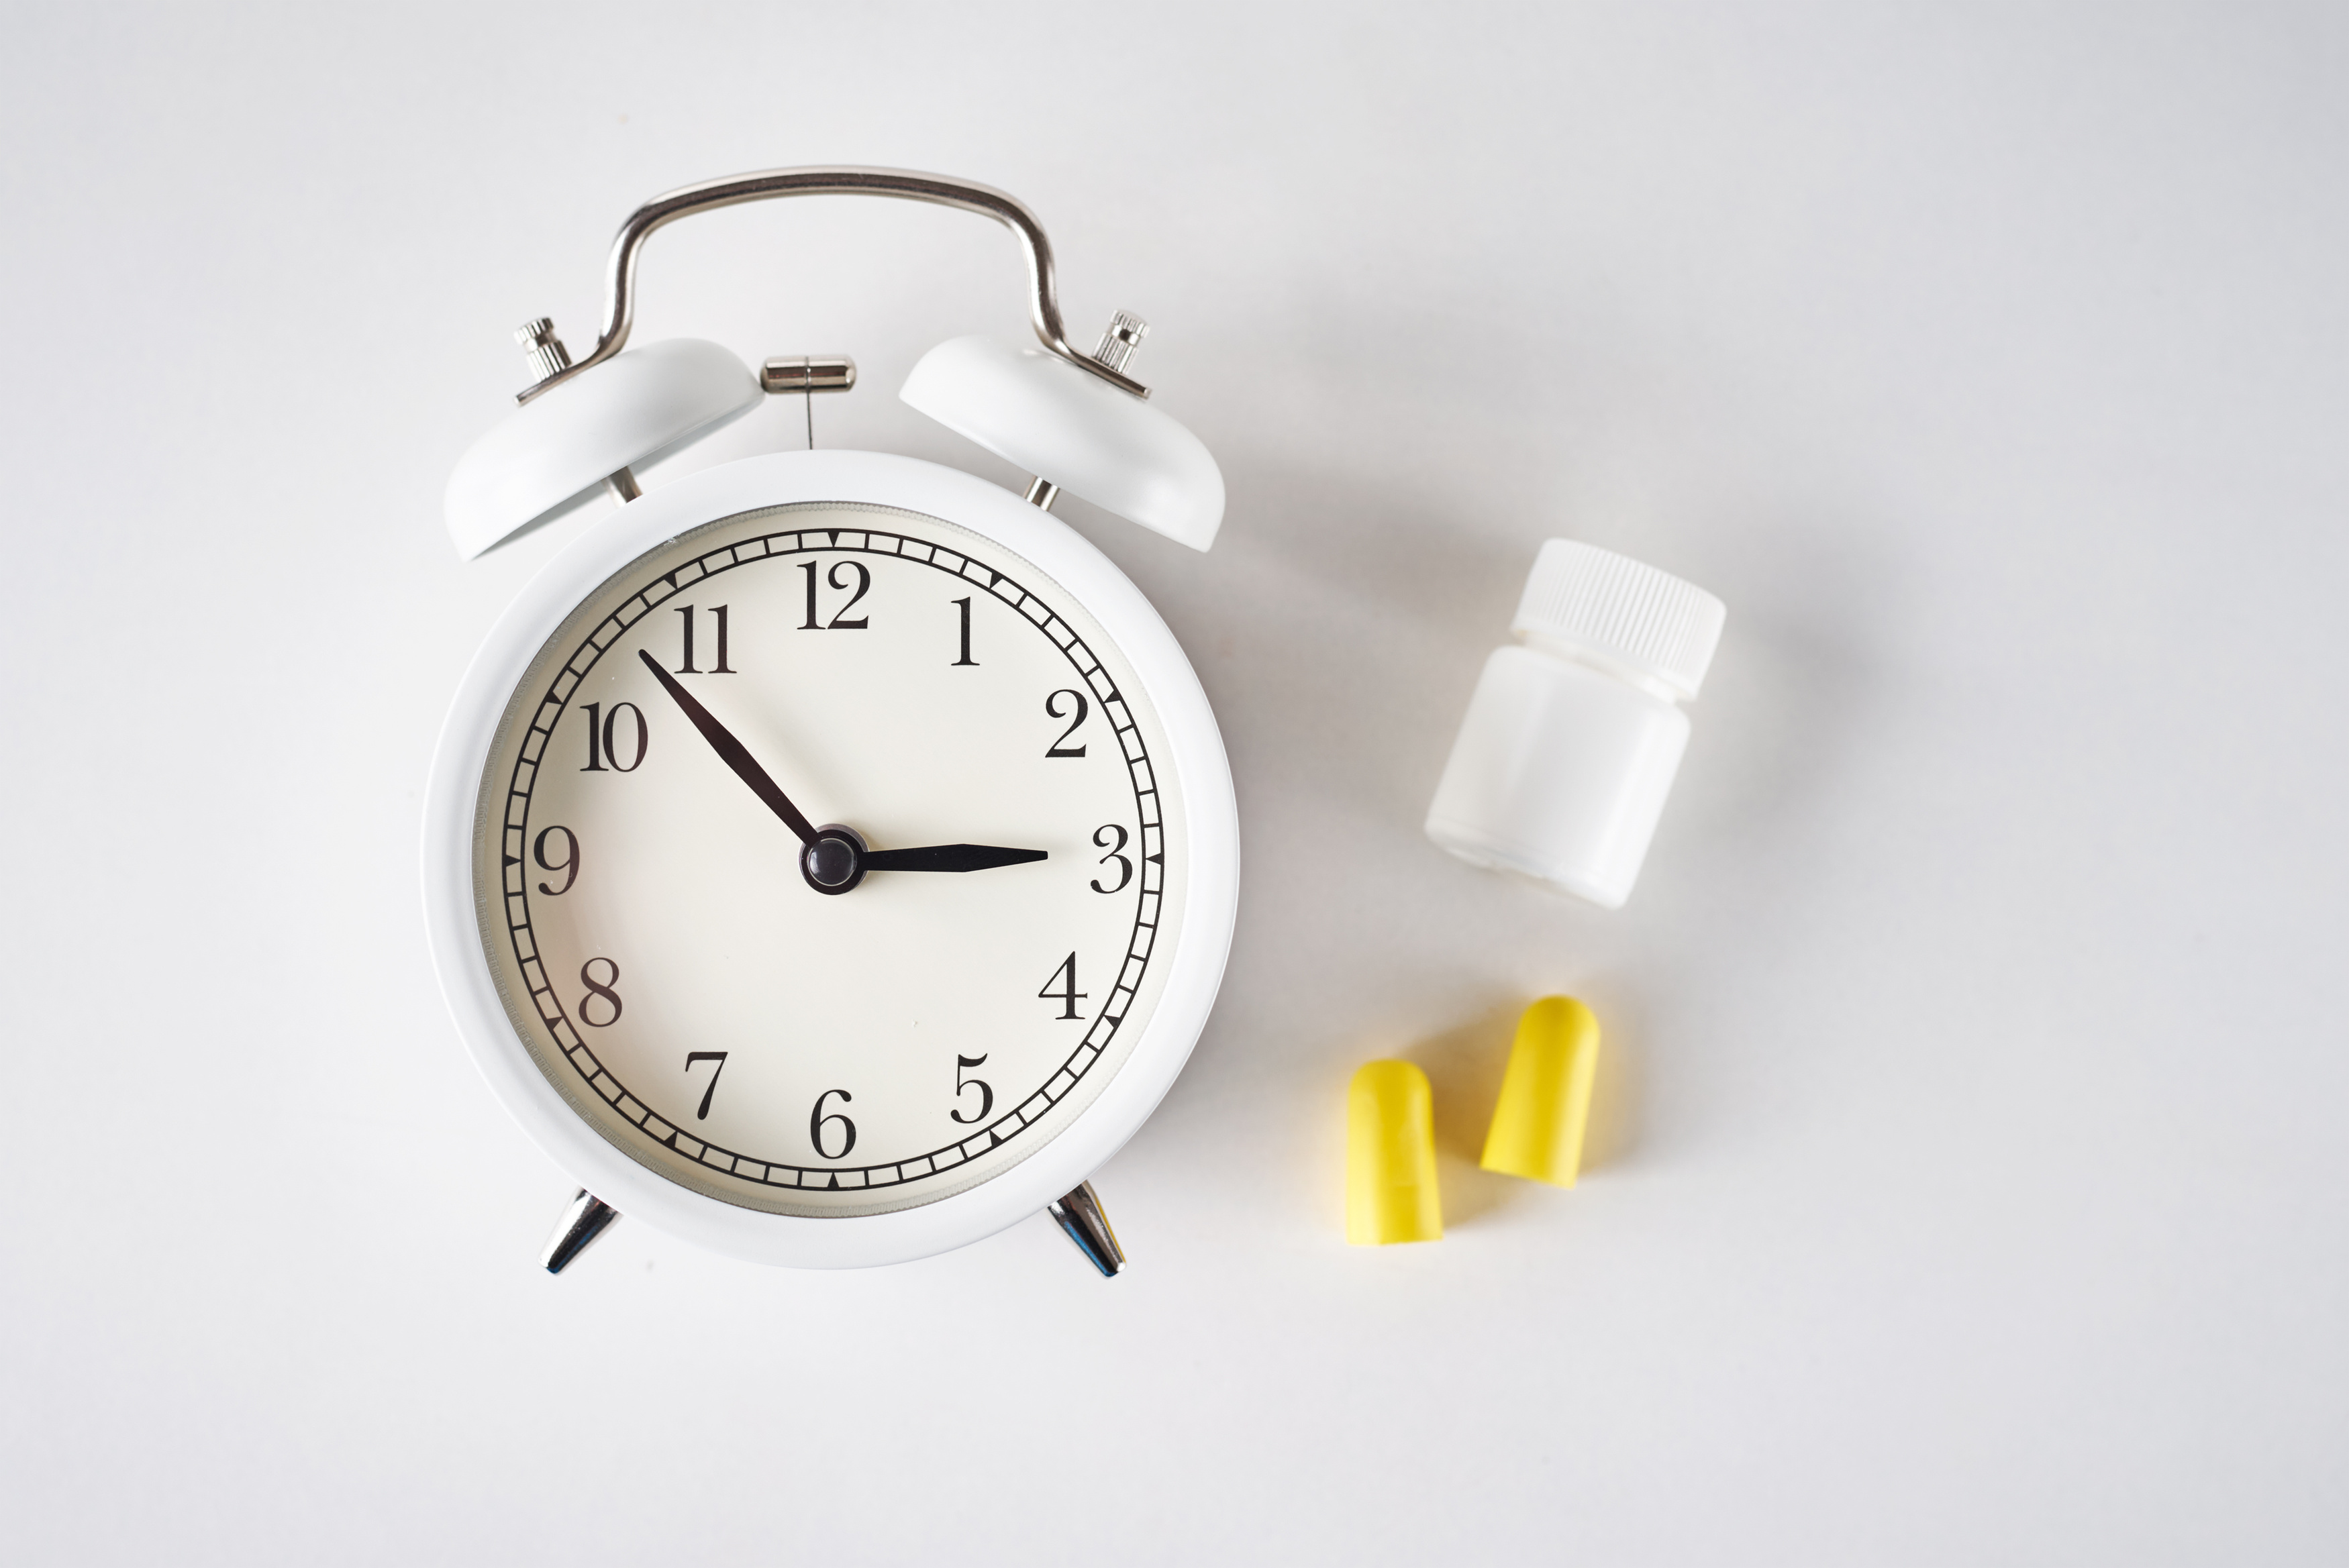 Alarm Clock with Ear Plugs and Pills